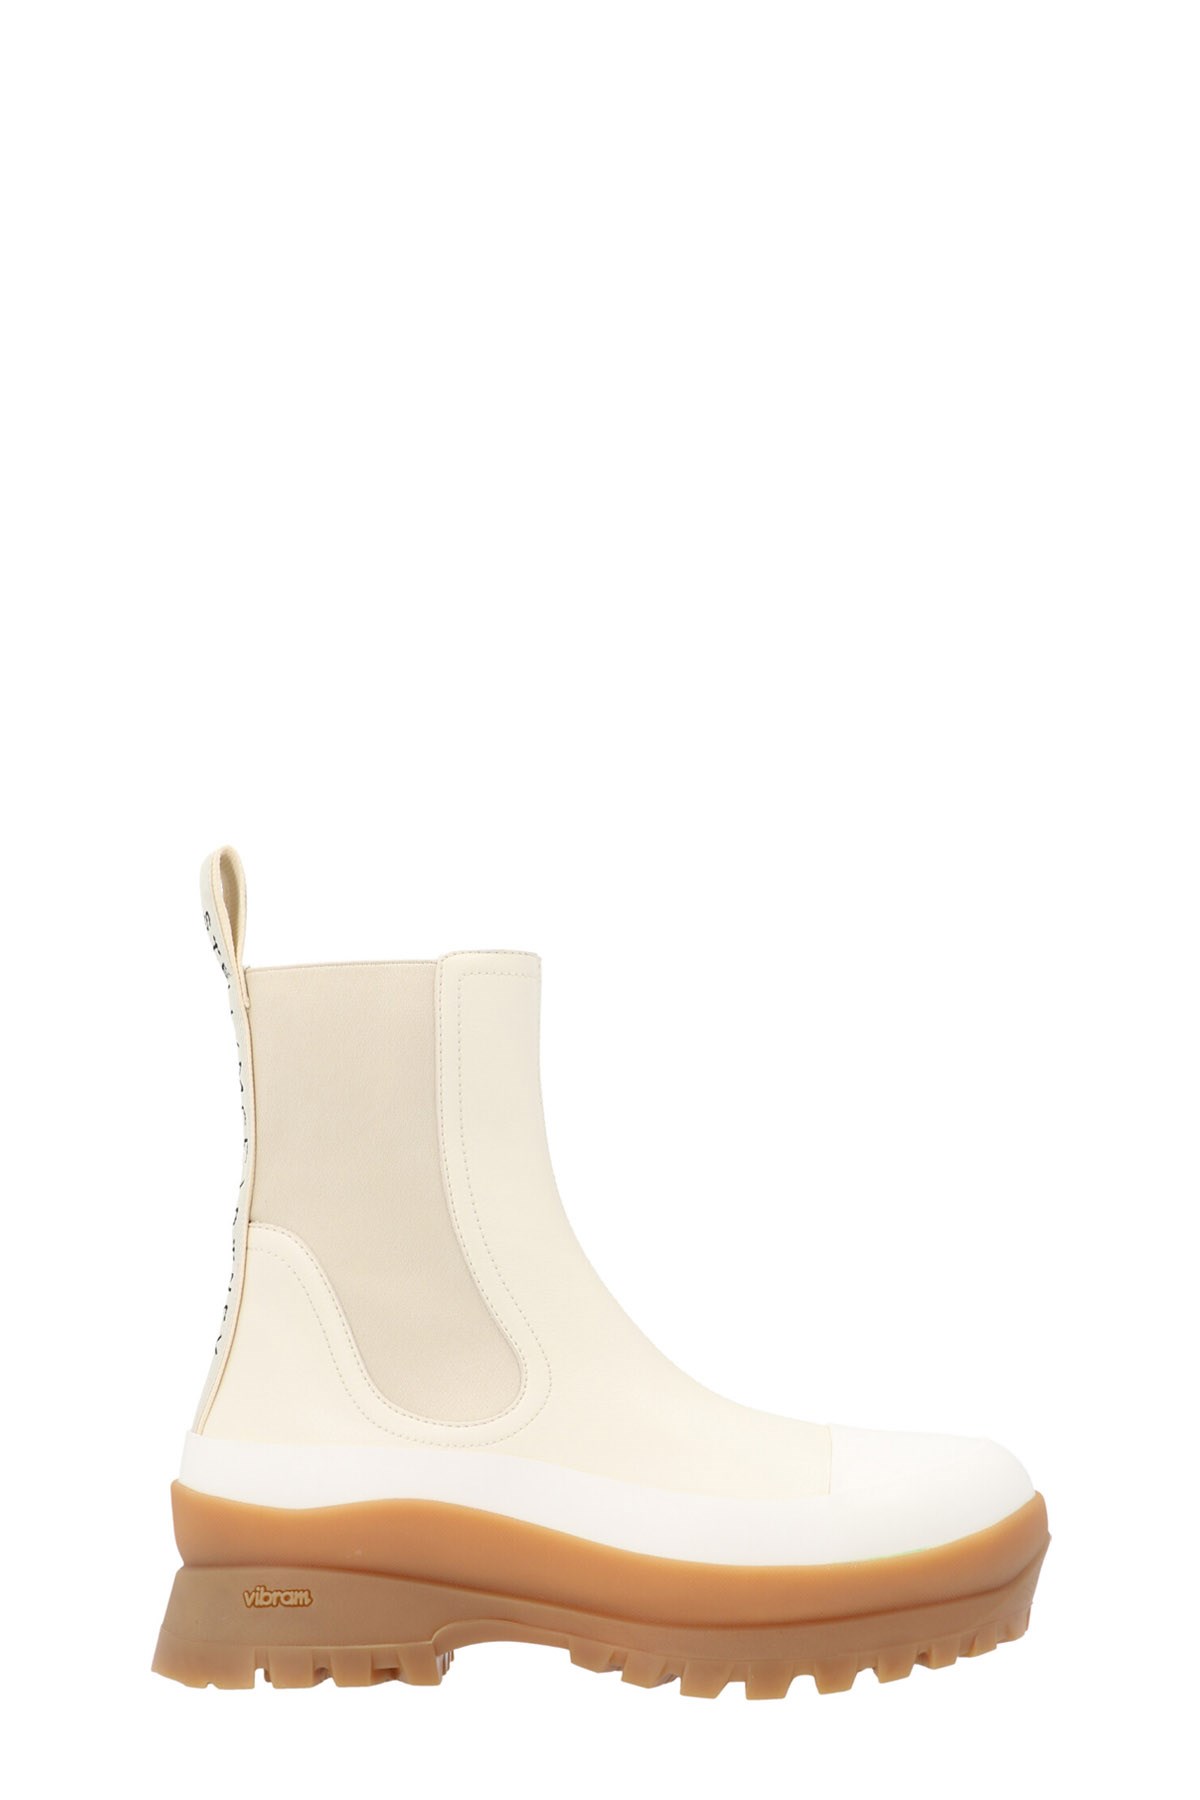 STELLA MCCARTNEY 'Trace Utility’ Ankle Boots